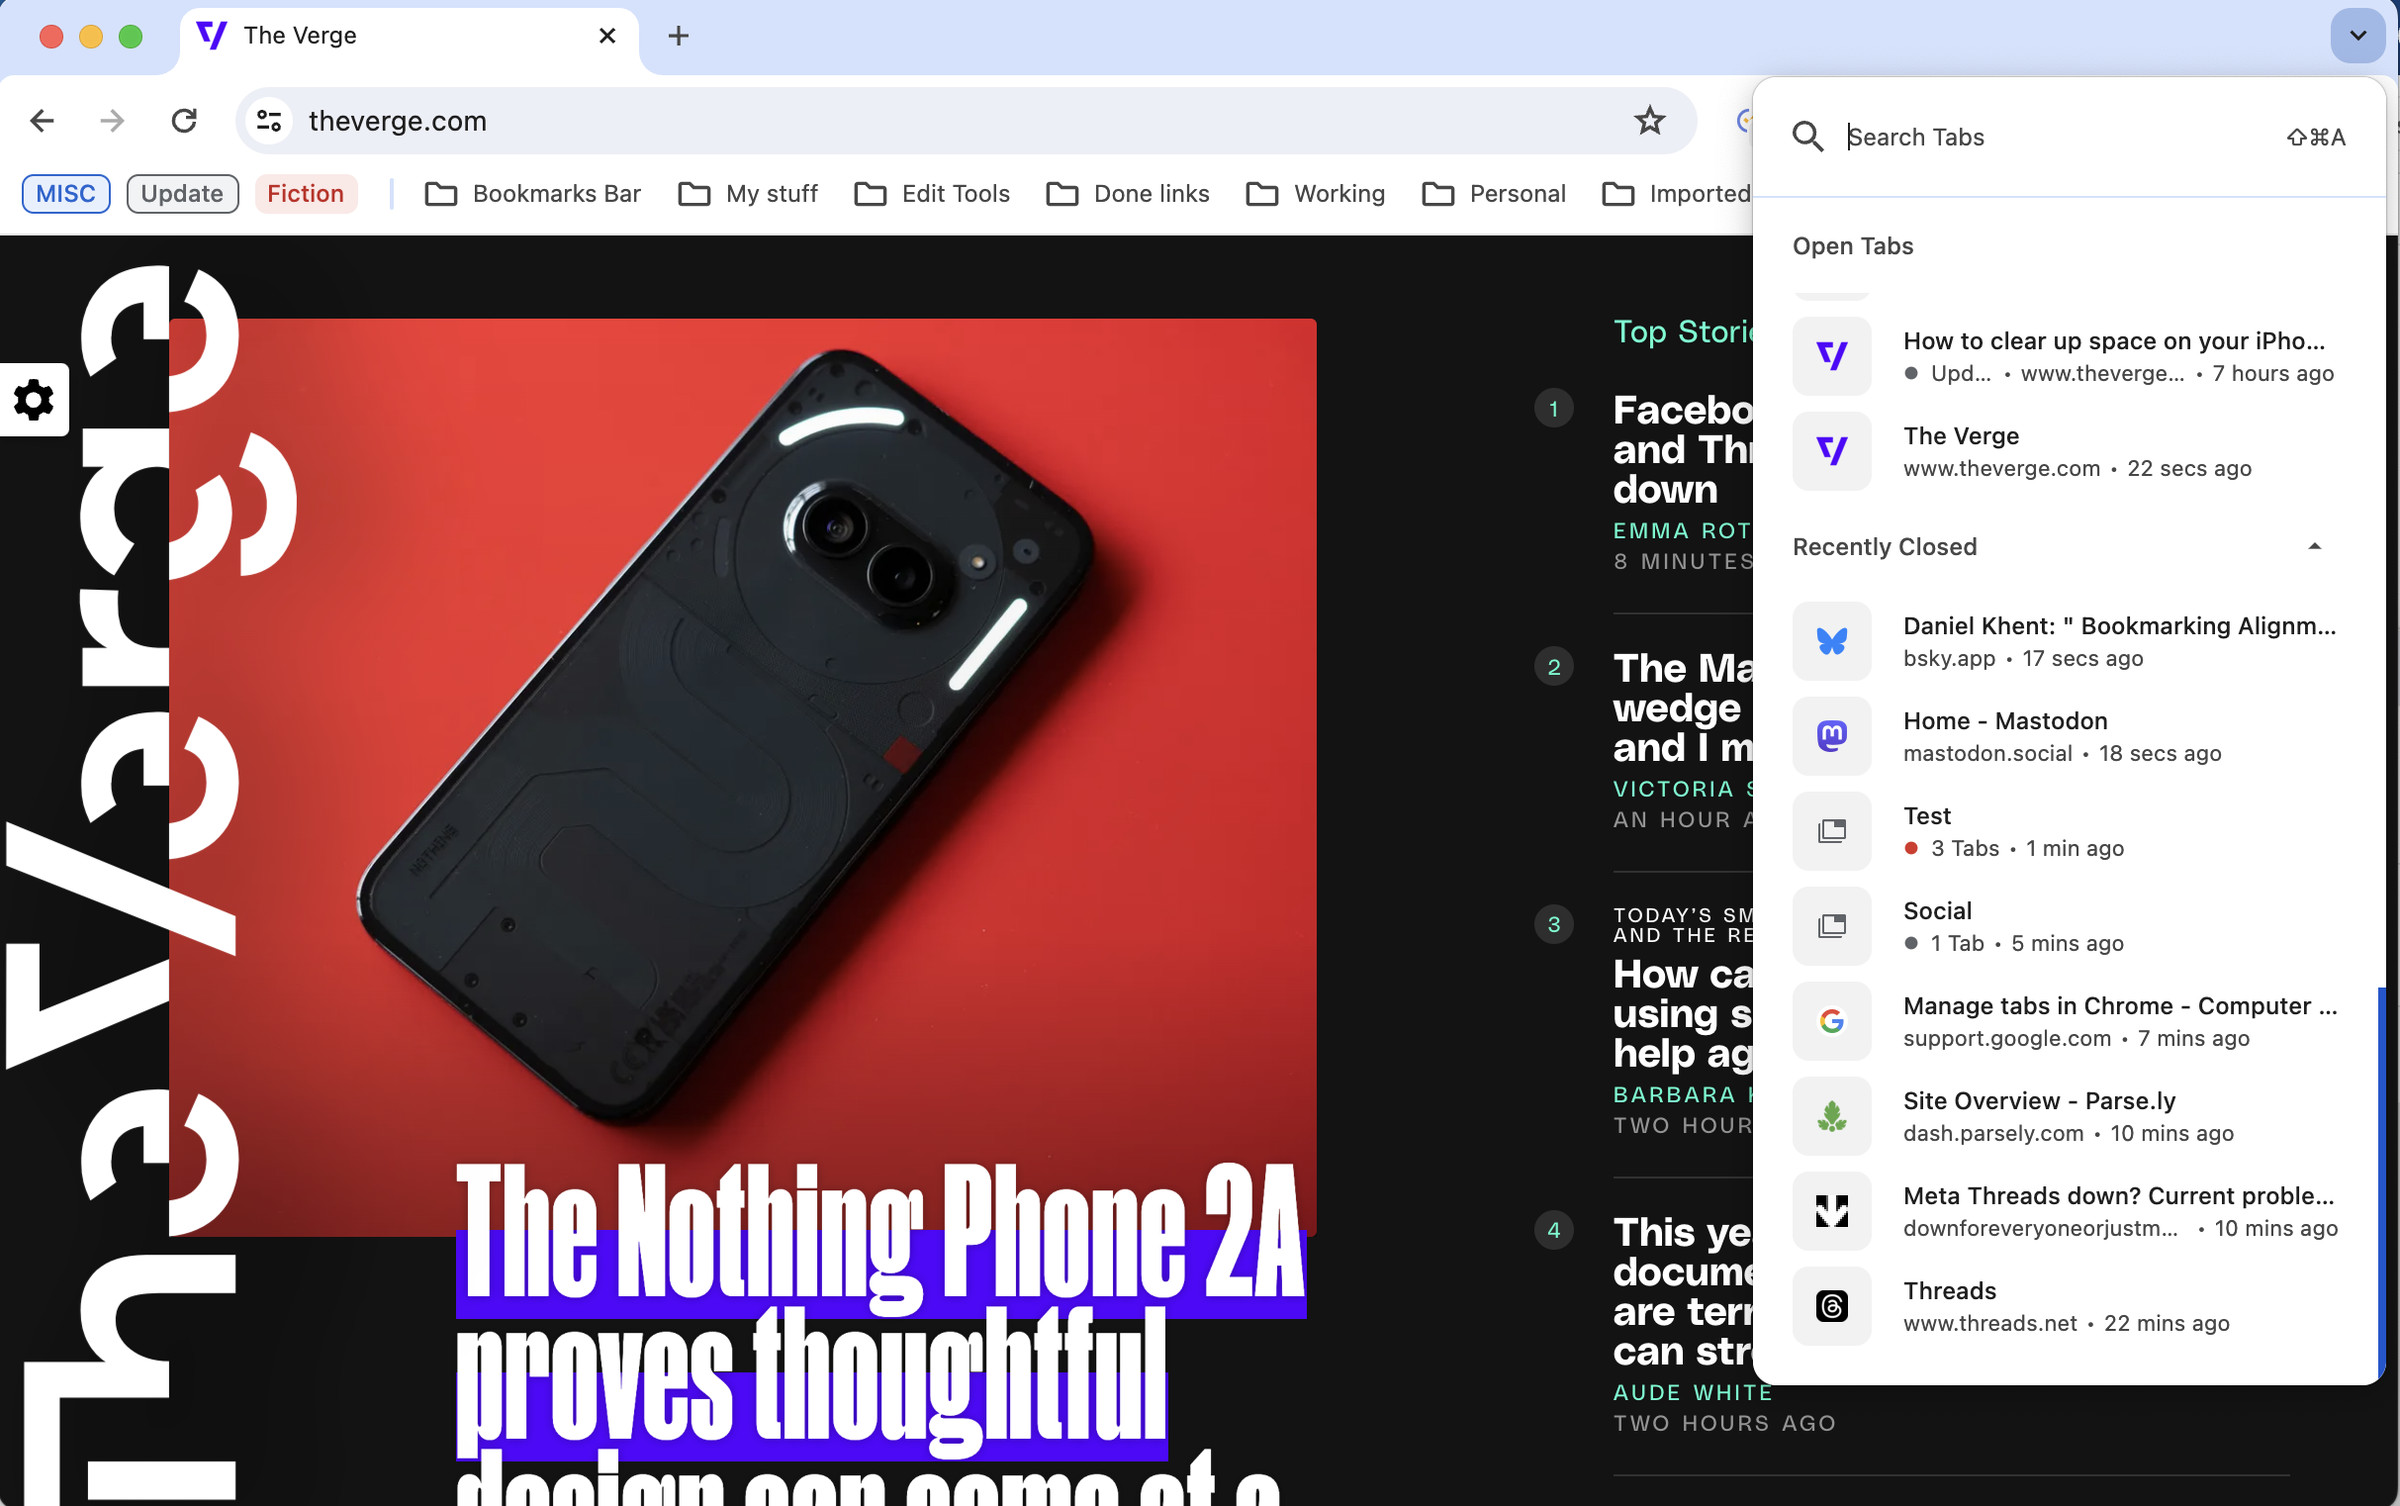 The Verge main page with Search Tabs drop down menu on the right.